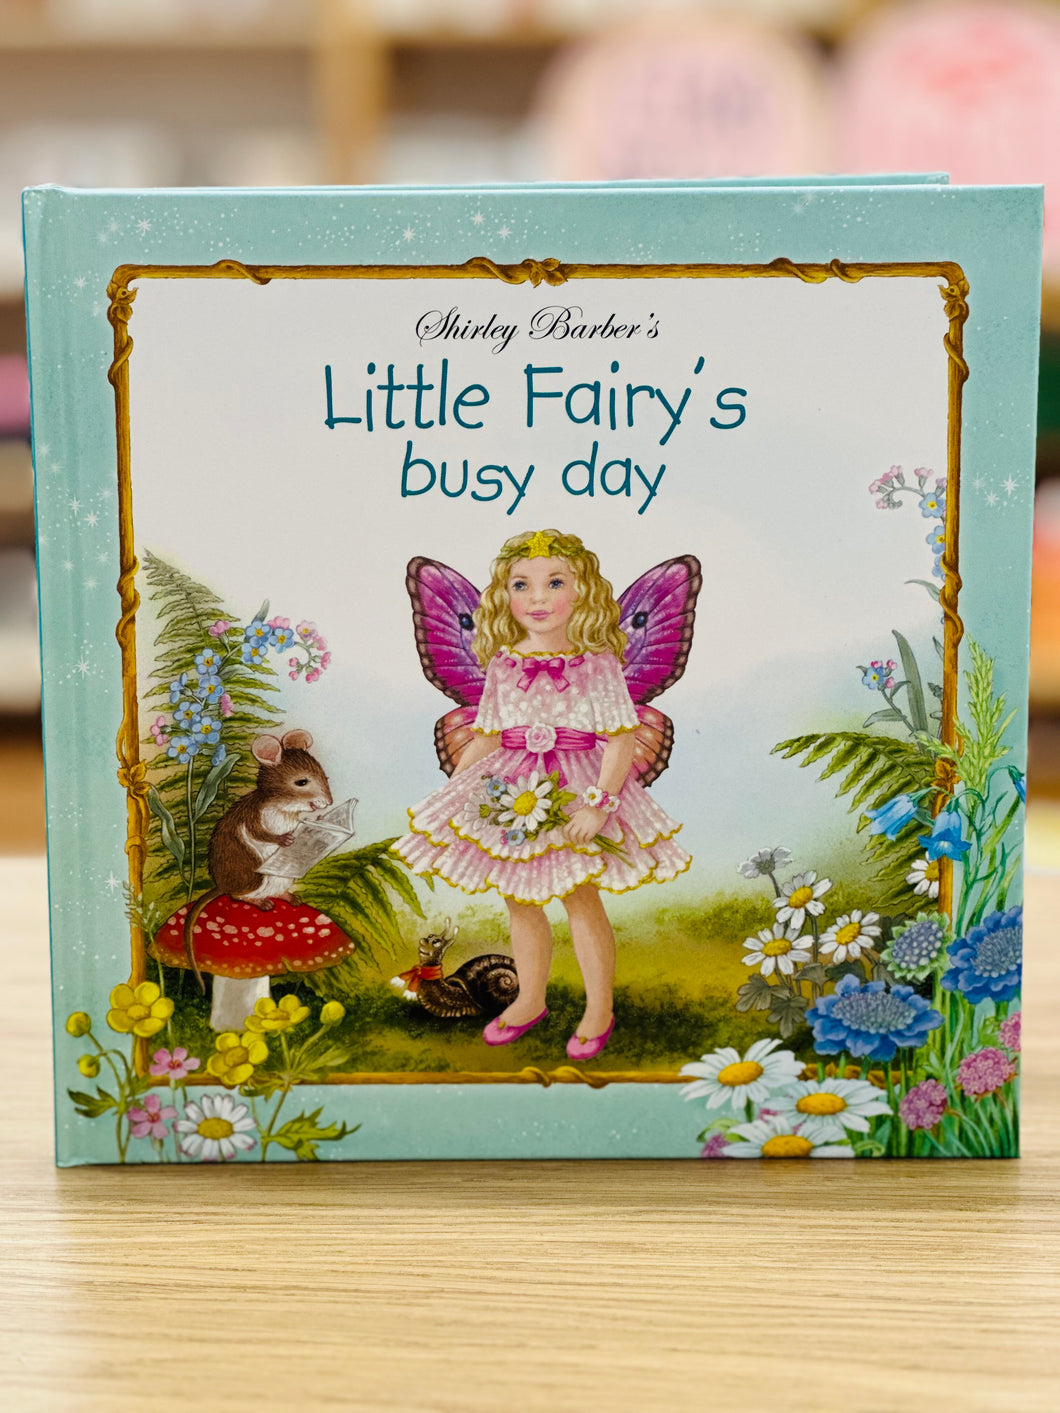 Little Fairy's busy day